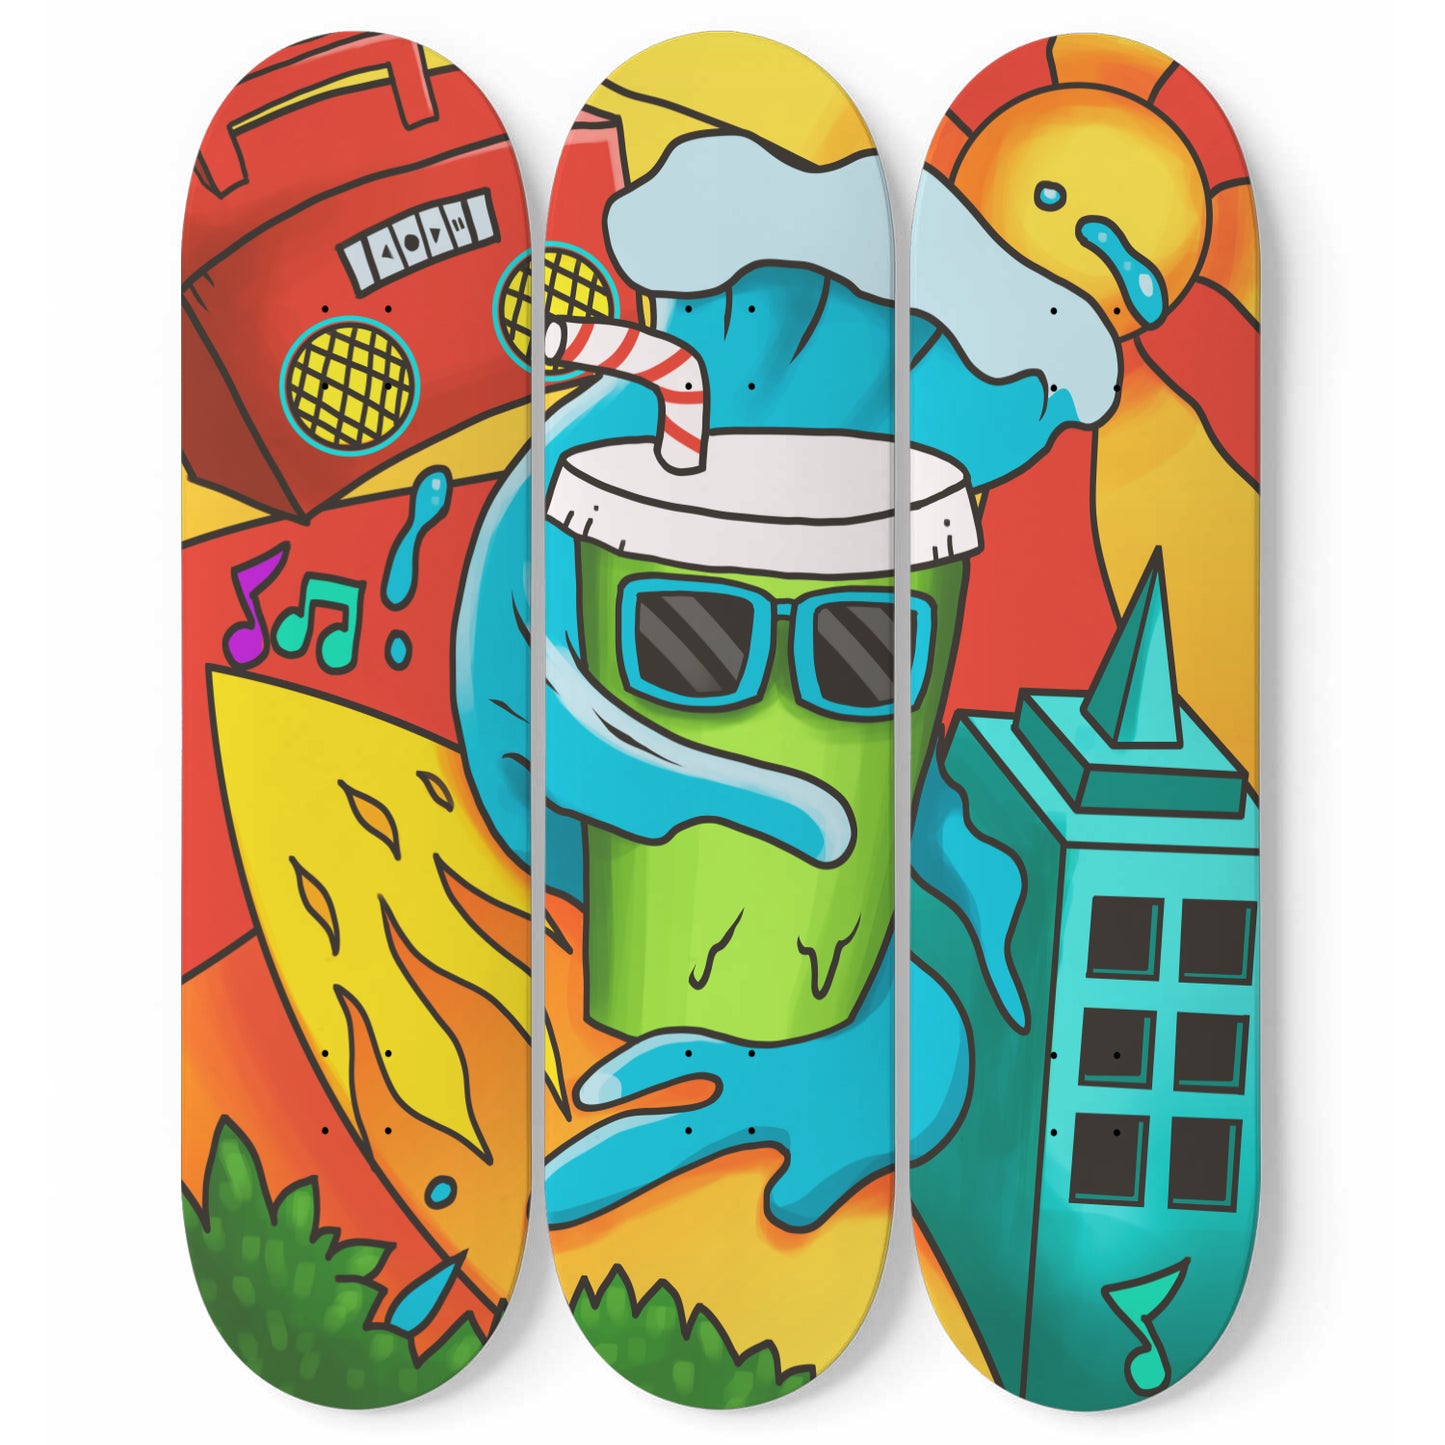 Chillin' Out Of Summer Doodle - 3 Piece Skateboard Wall Art, Summer Doodle Maple Wood Hanging, Living Room/ Game Room Wall Decor